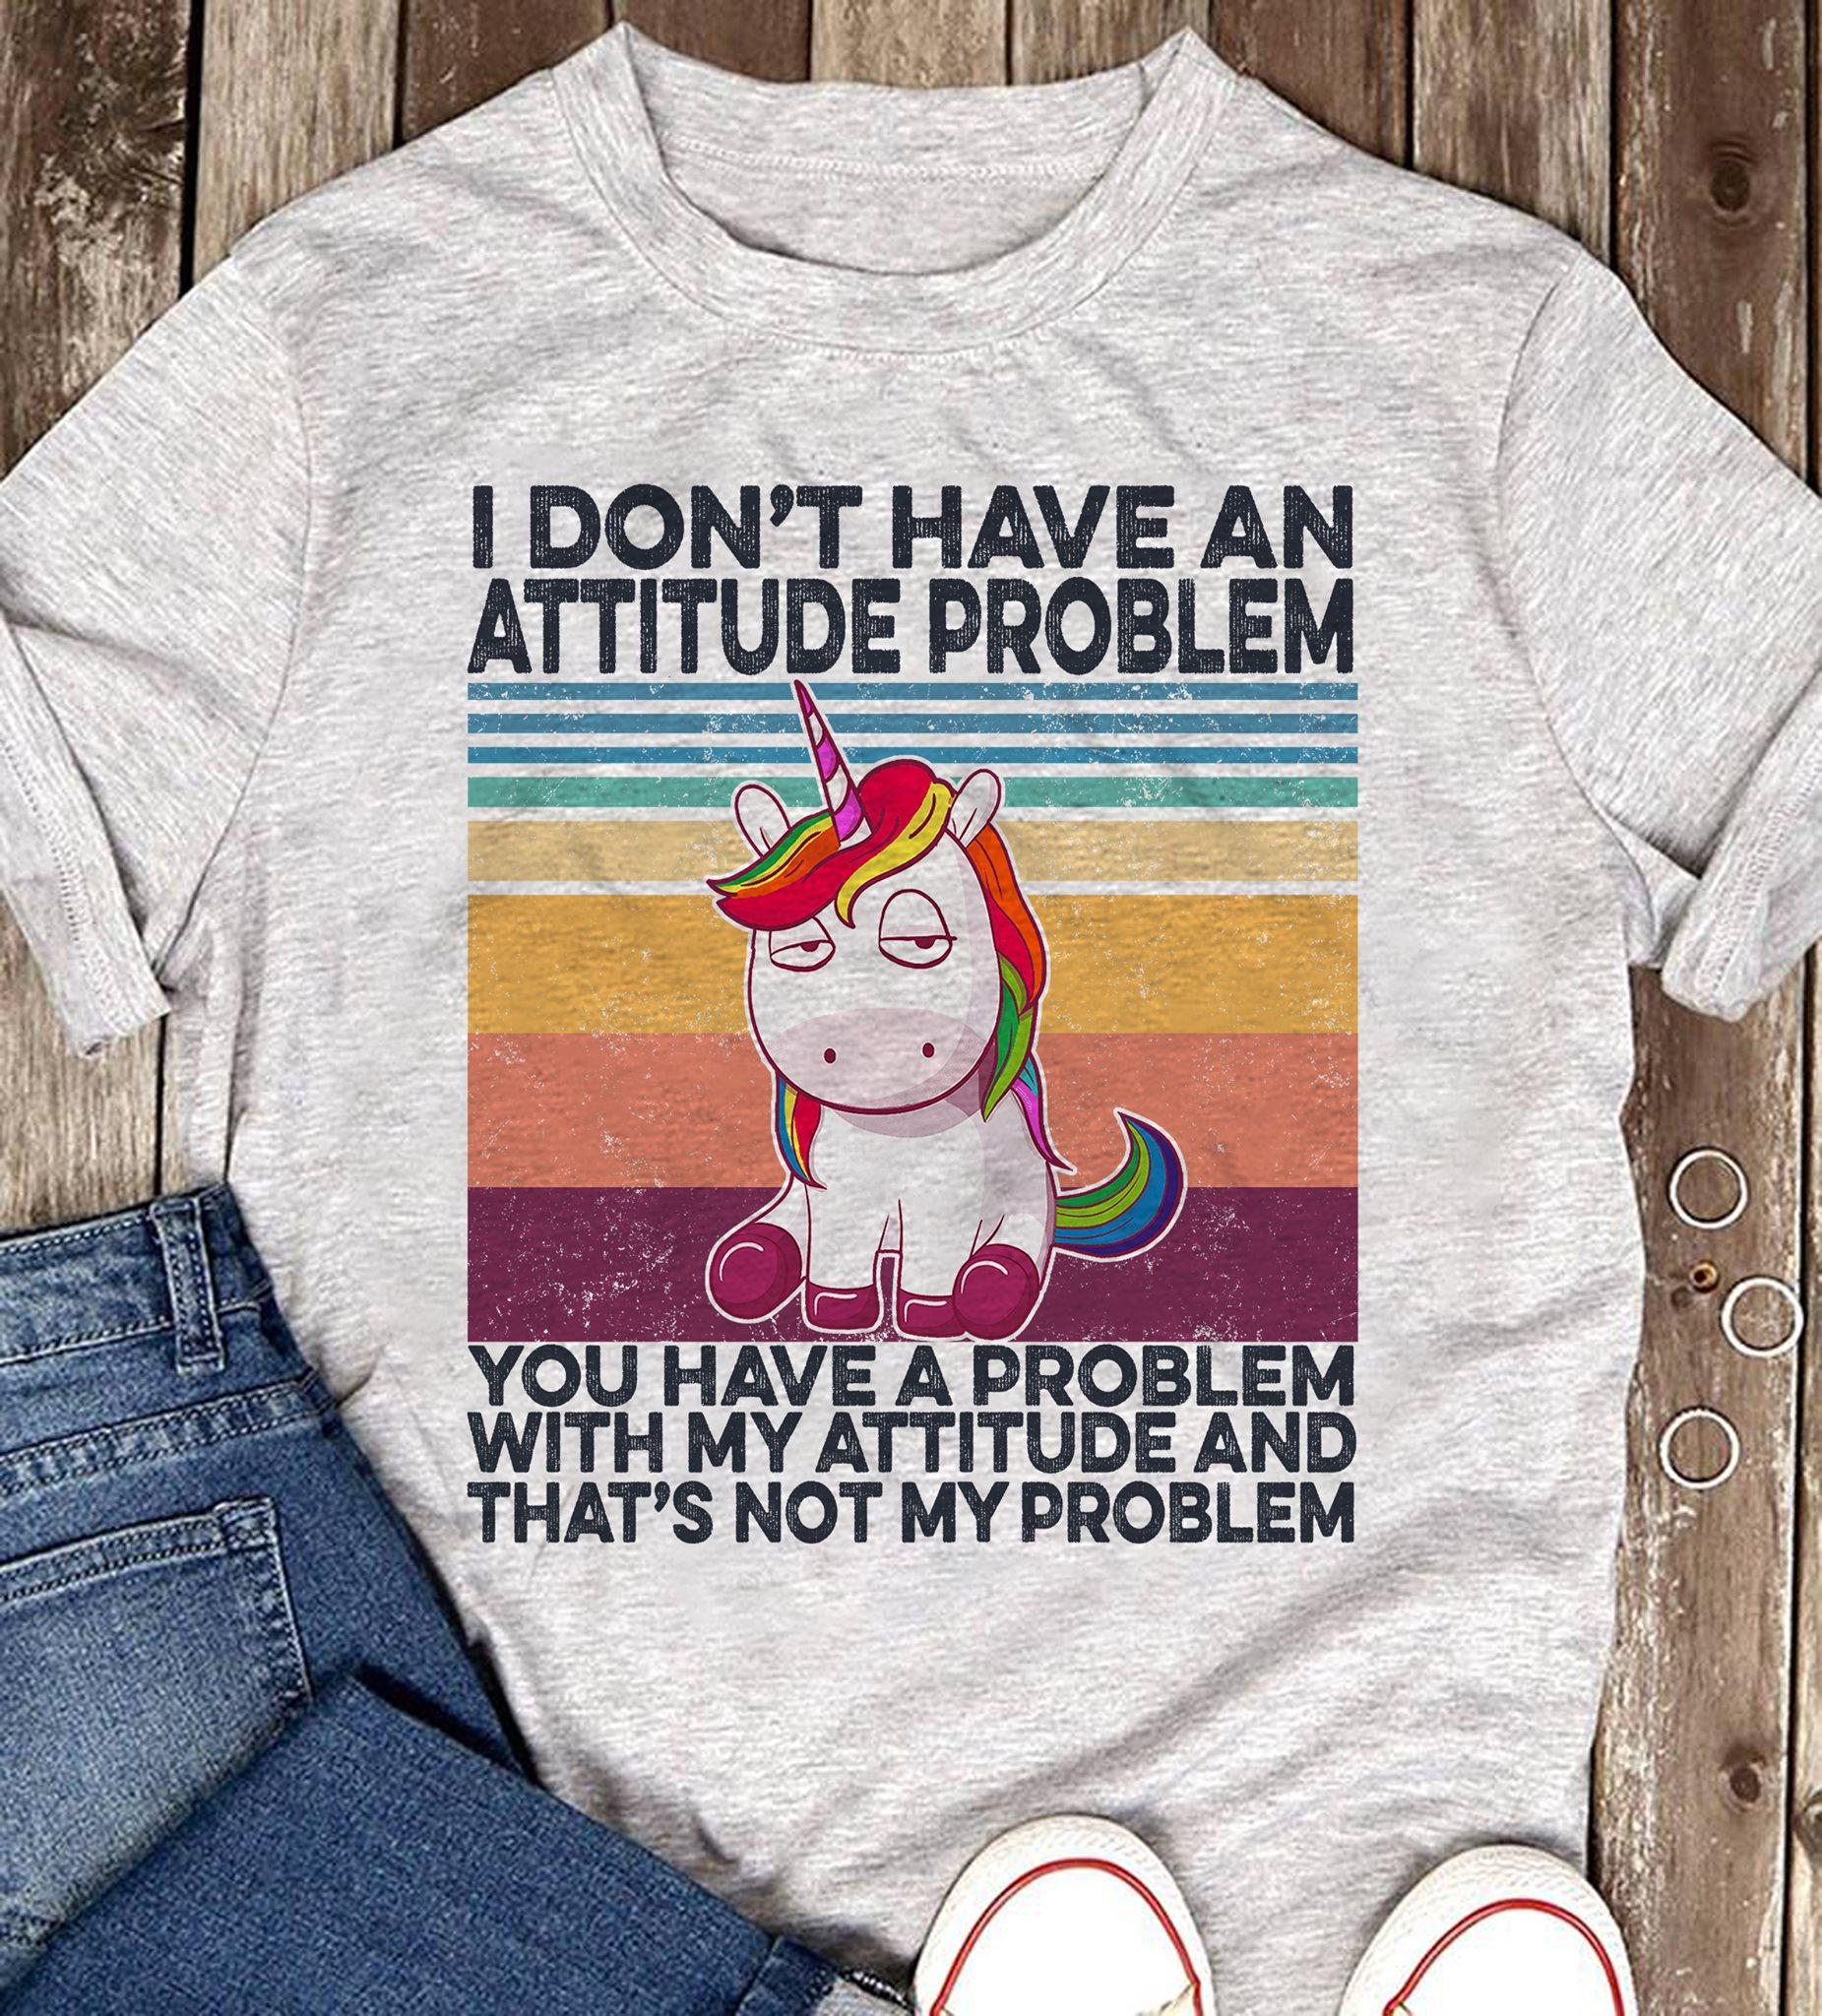 I don't have an attitude problem you have a problem with my attitude and that's not my problem - Unicorn attitude